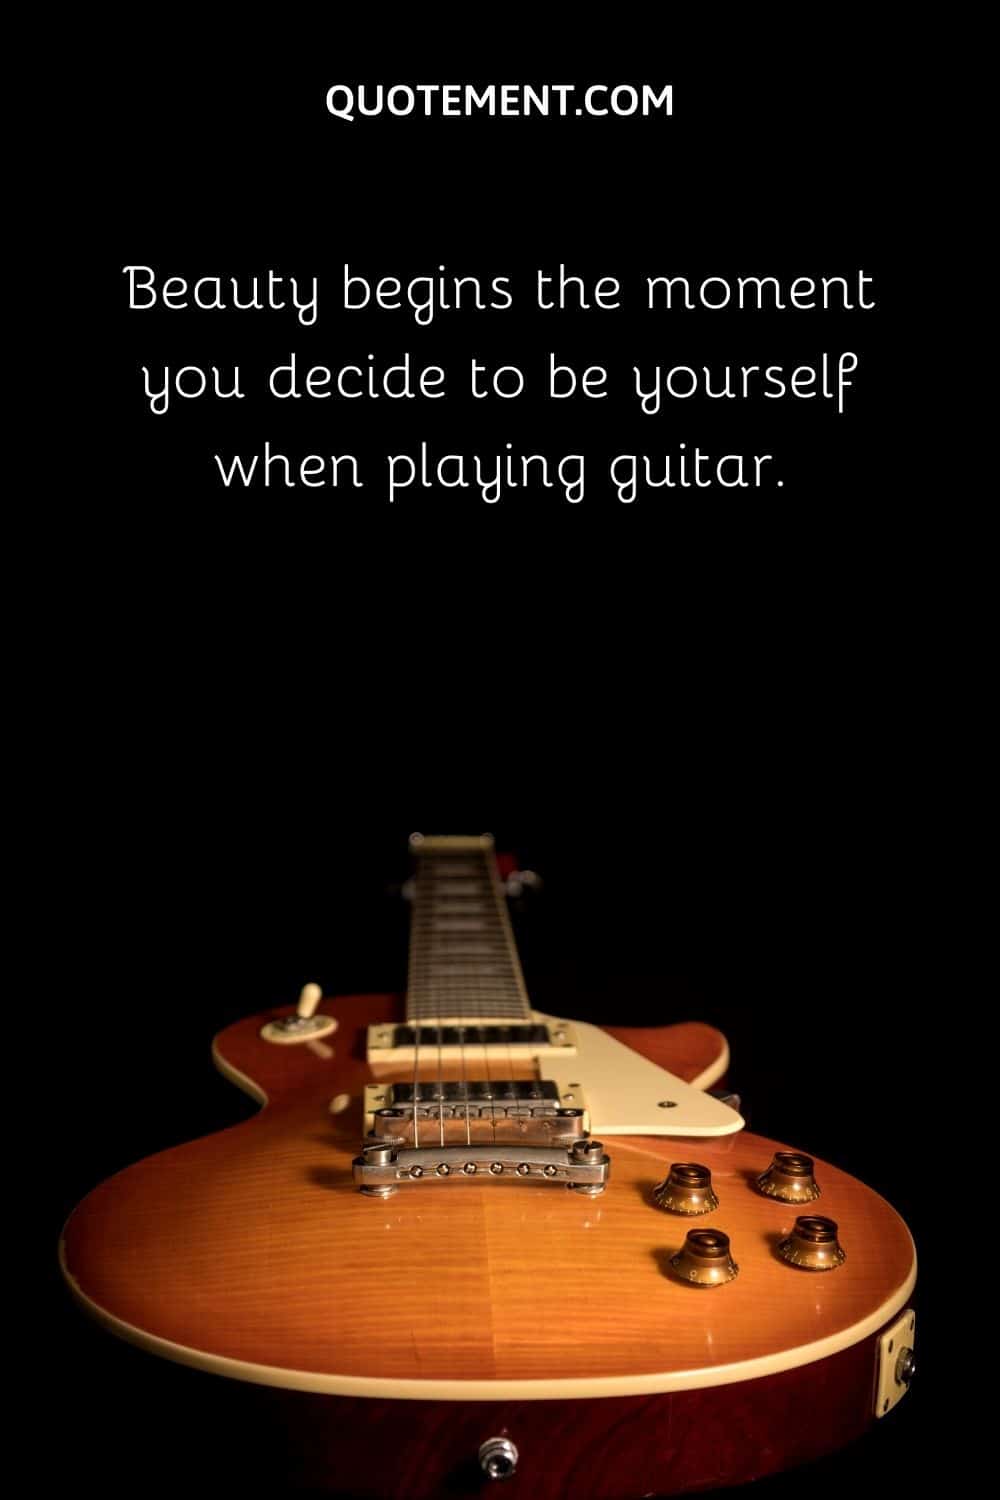 Beauty begins the moment you decide to be yourself when playing guitar.